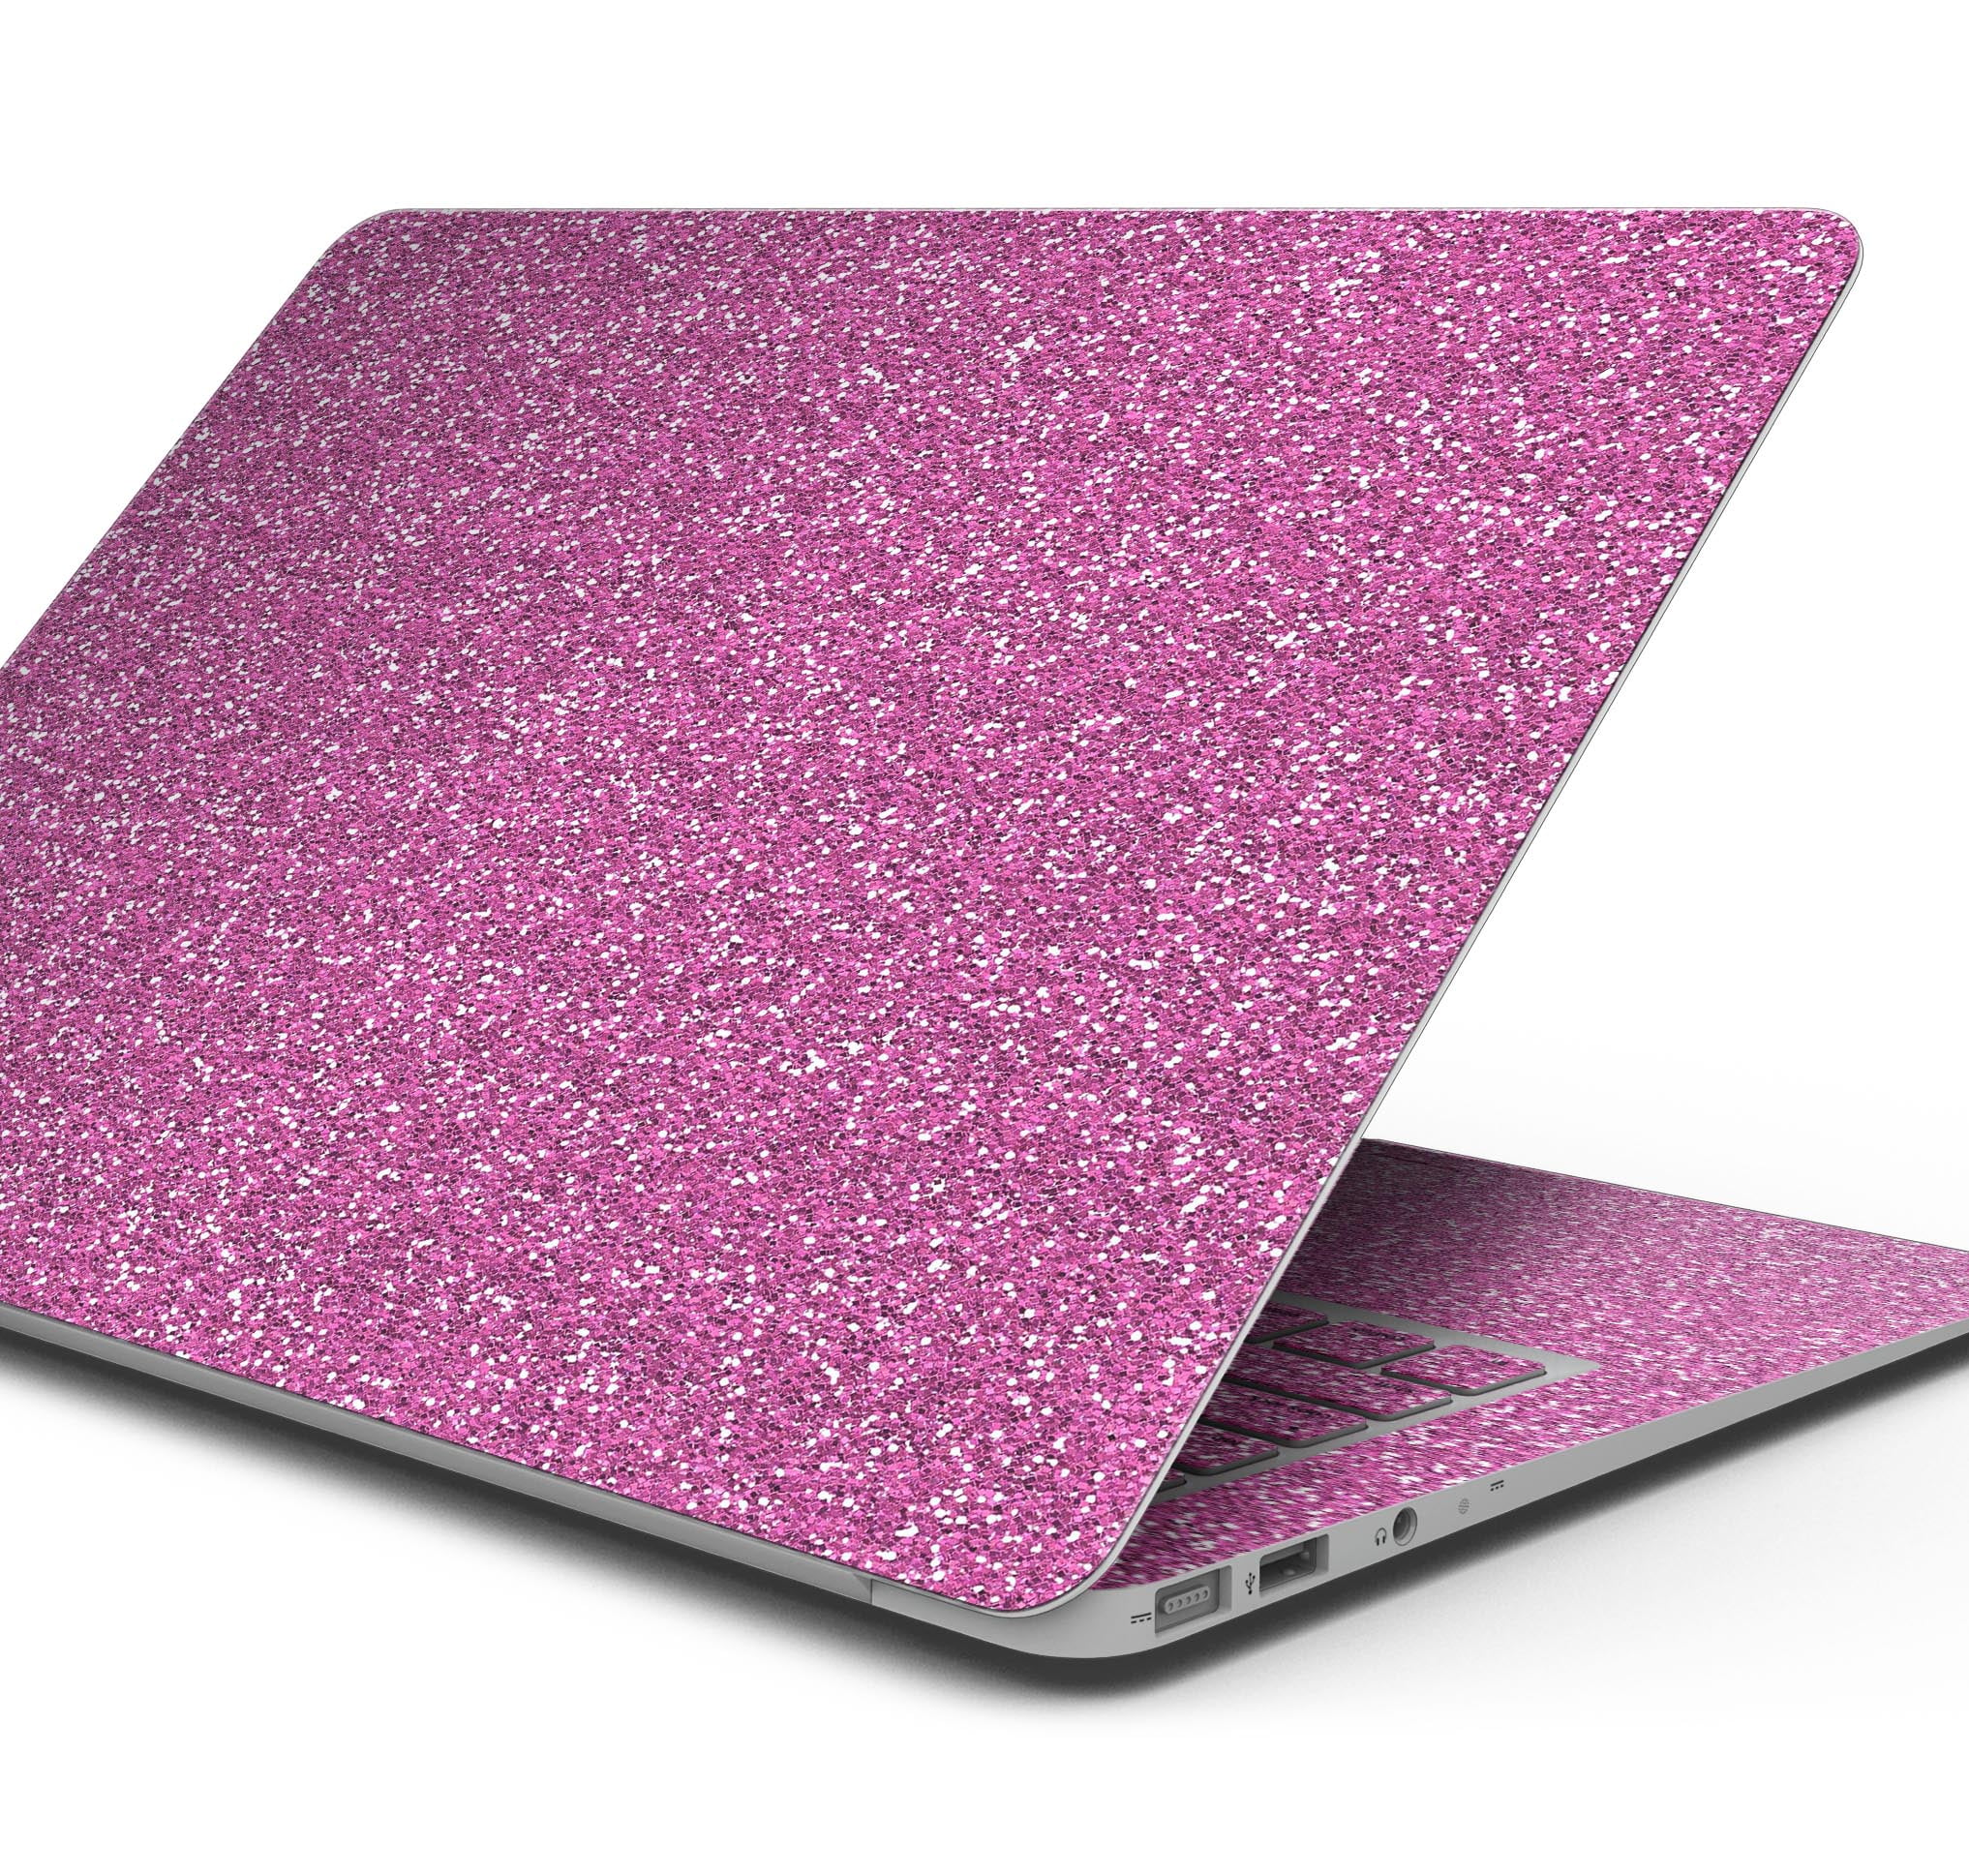 Bright violet-pink paint stains Macbook case for new Pro Mac Laptop 13 2019 and MacBook Air 13   natural stone A1466 bright marble A2141